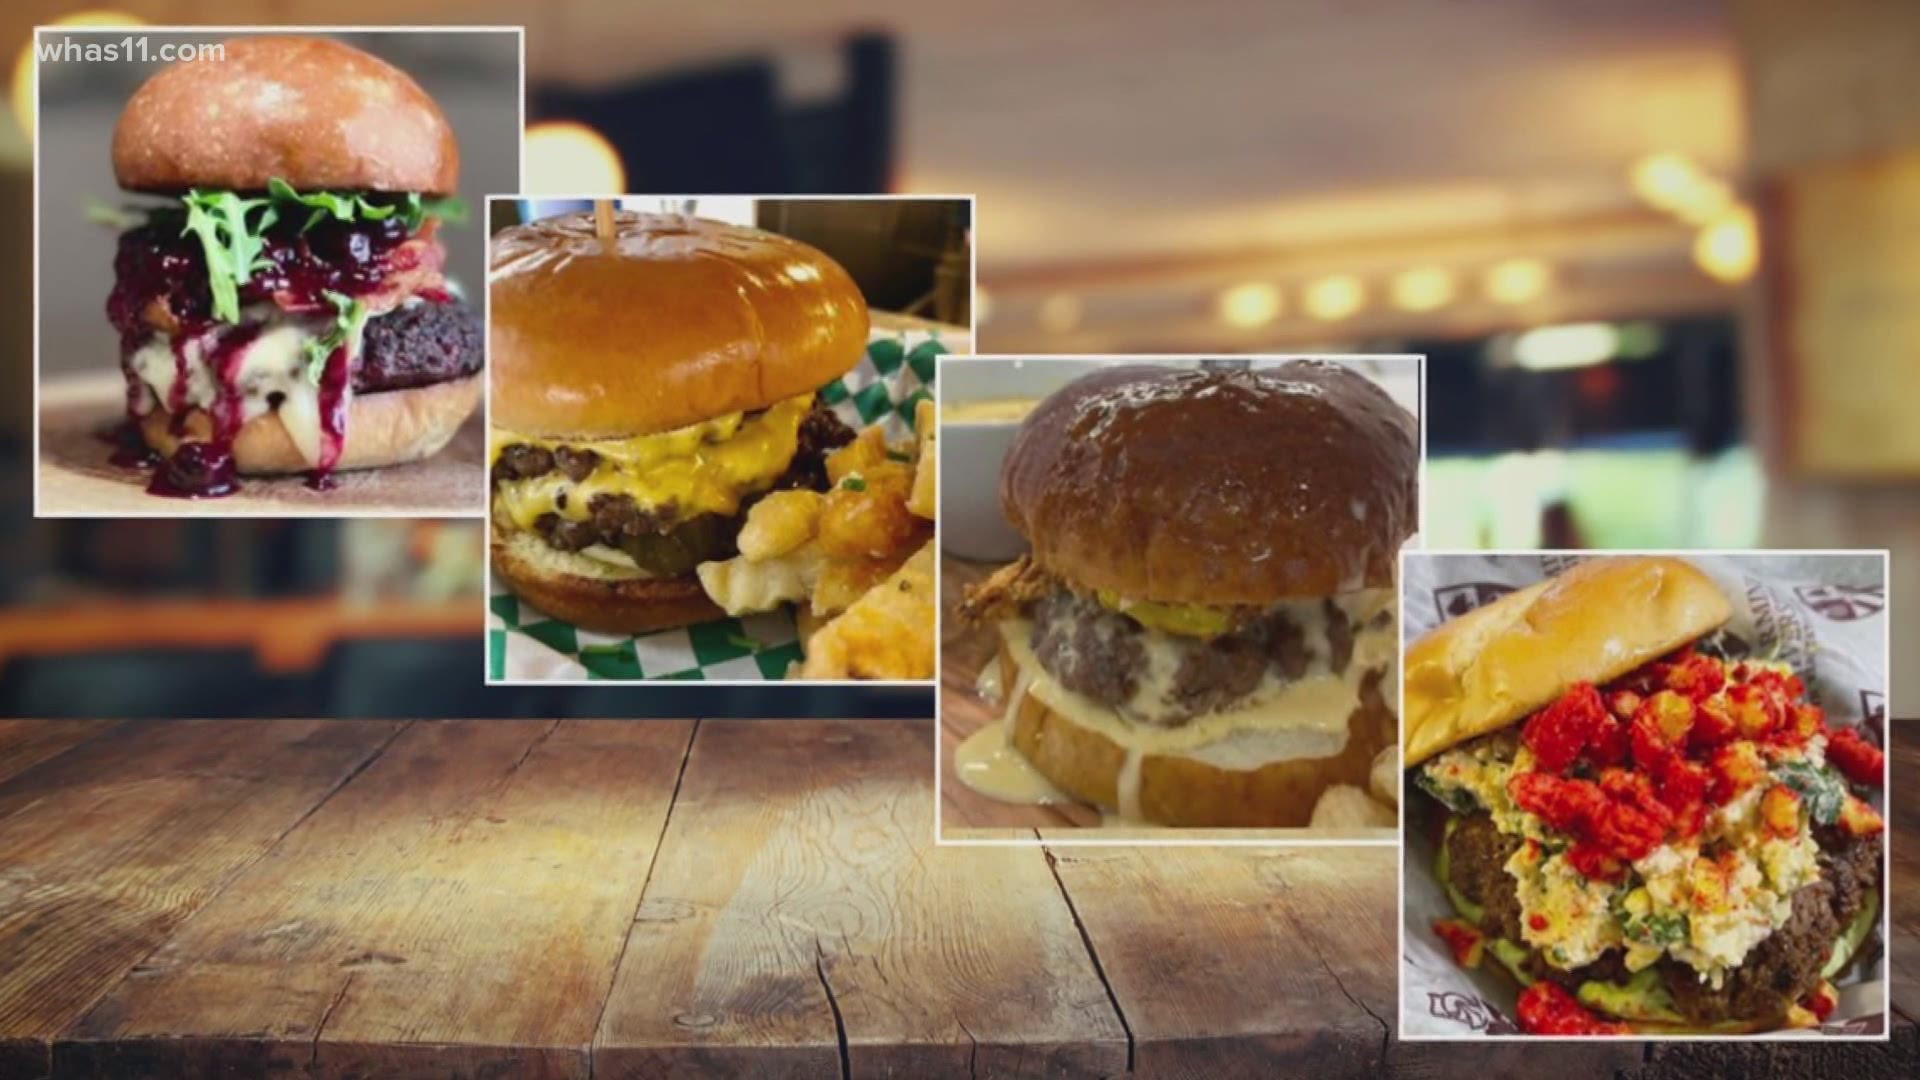 Four local chefs have a chance to win big with their delicious burger creations.